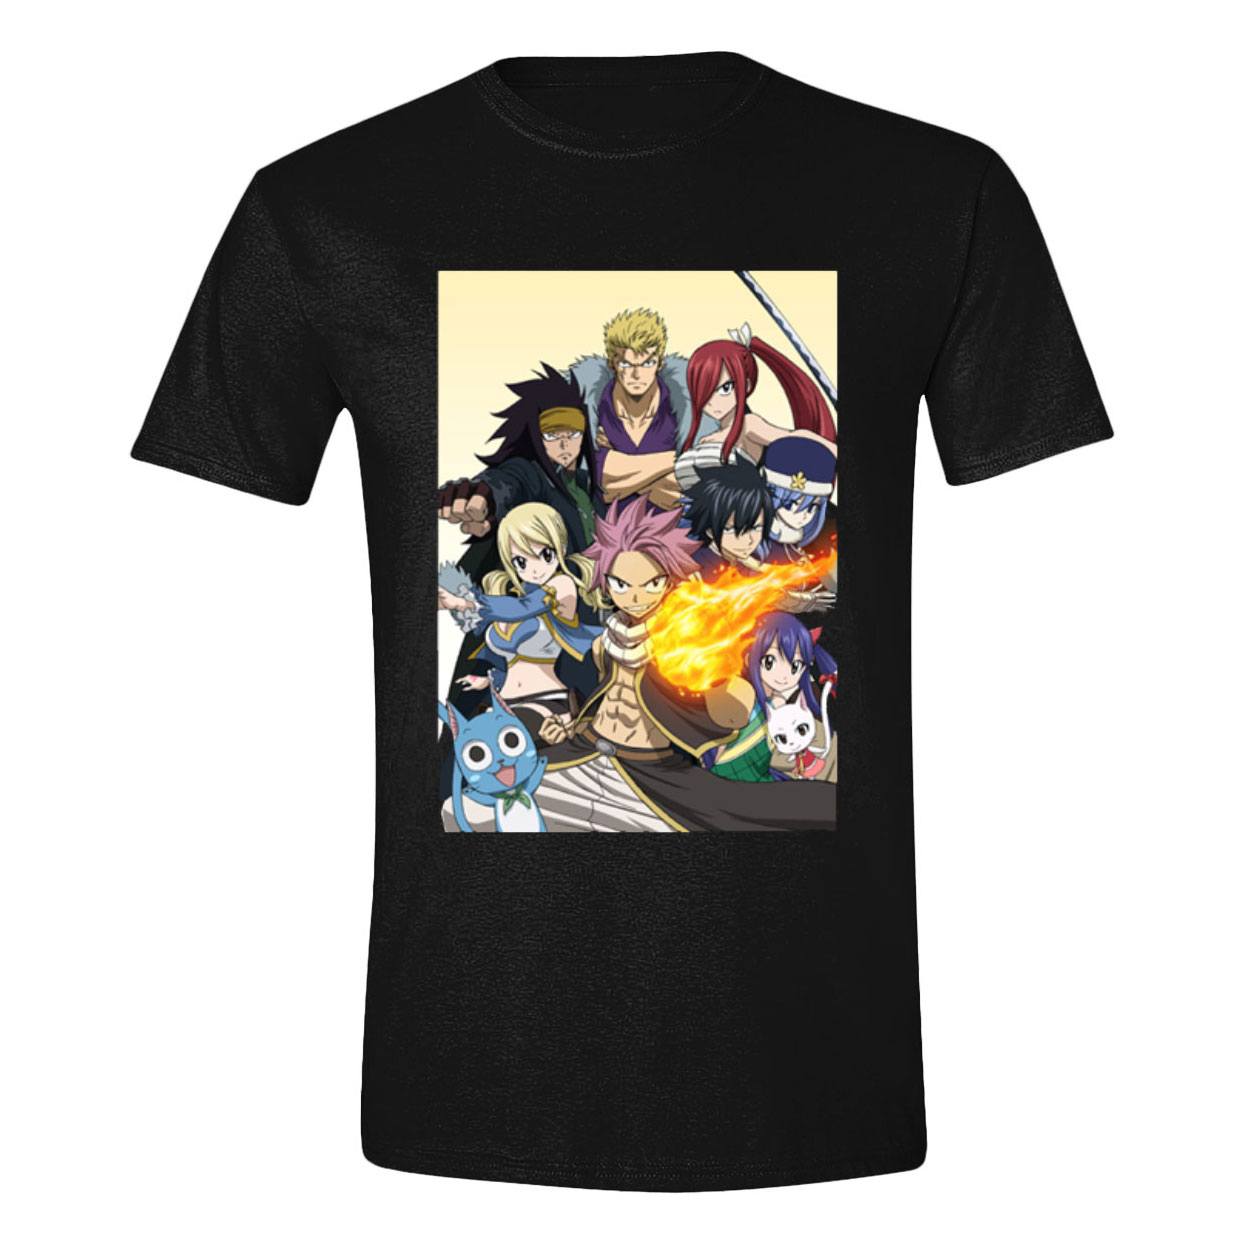 Fairy Tail T-Shirt All Characters (M)